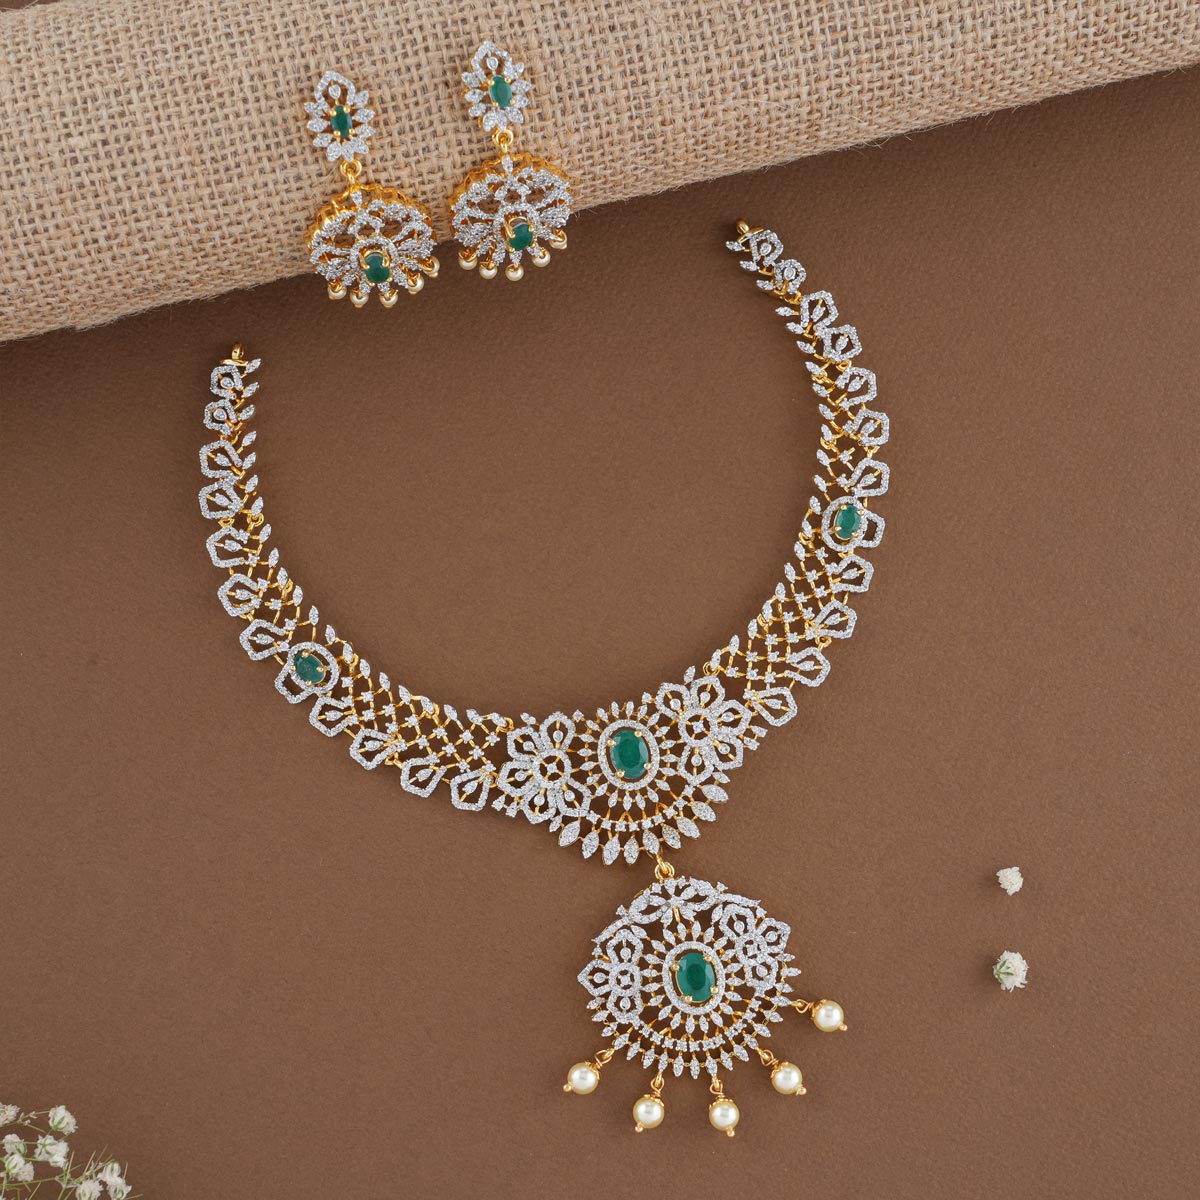 Evergreen Necklace Designs That You Must Own • South India Jewels | Ruby  necklace designs, Necklace designs, Indian bridal jewelry sets